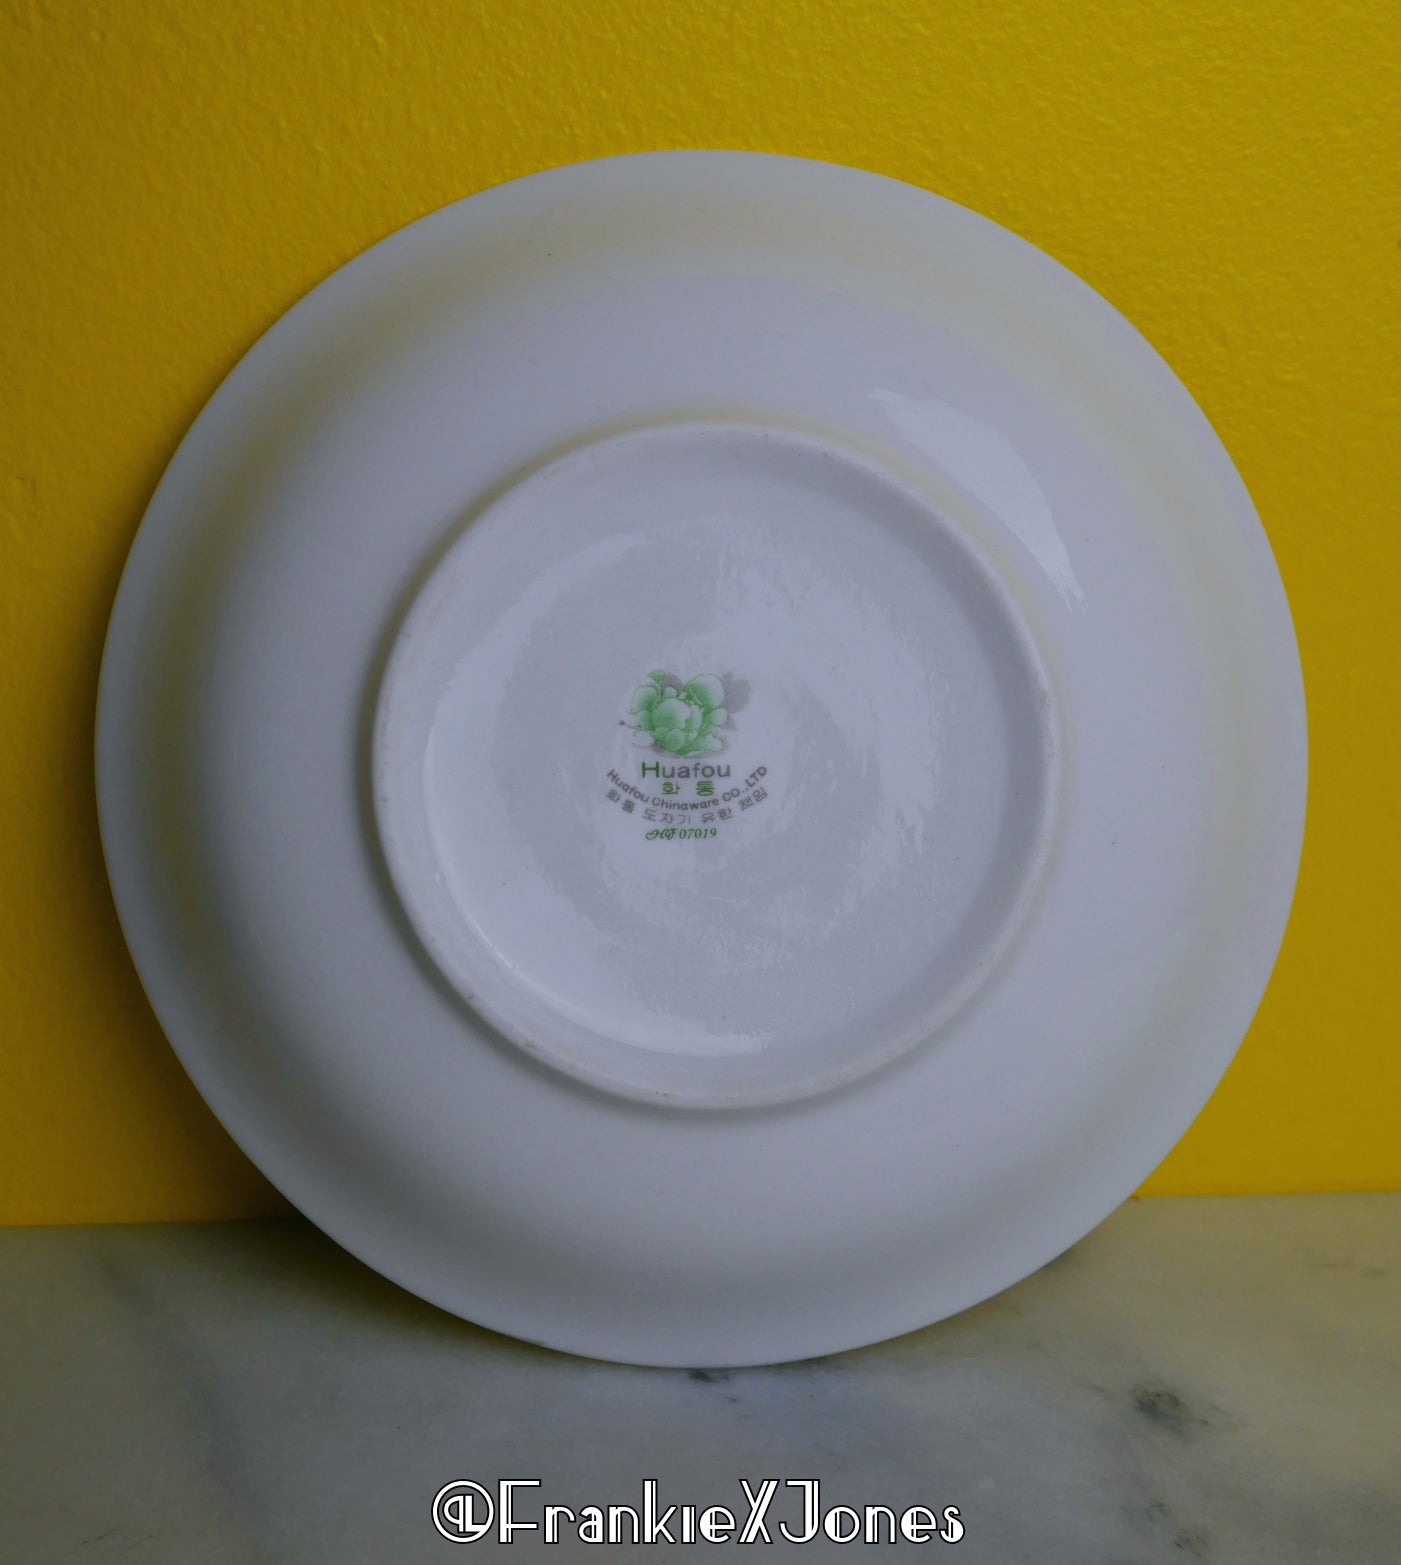 Green Peony Cereal Bowls ✤ Huafou Chinaware Co. ✤ Set of 2